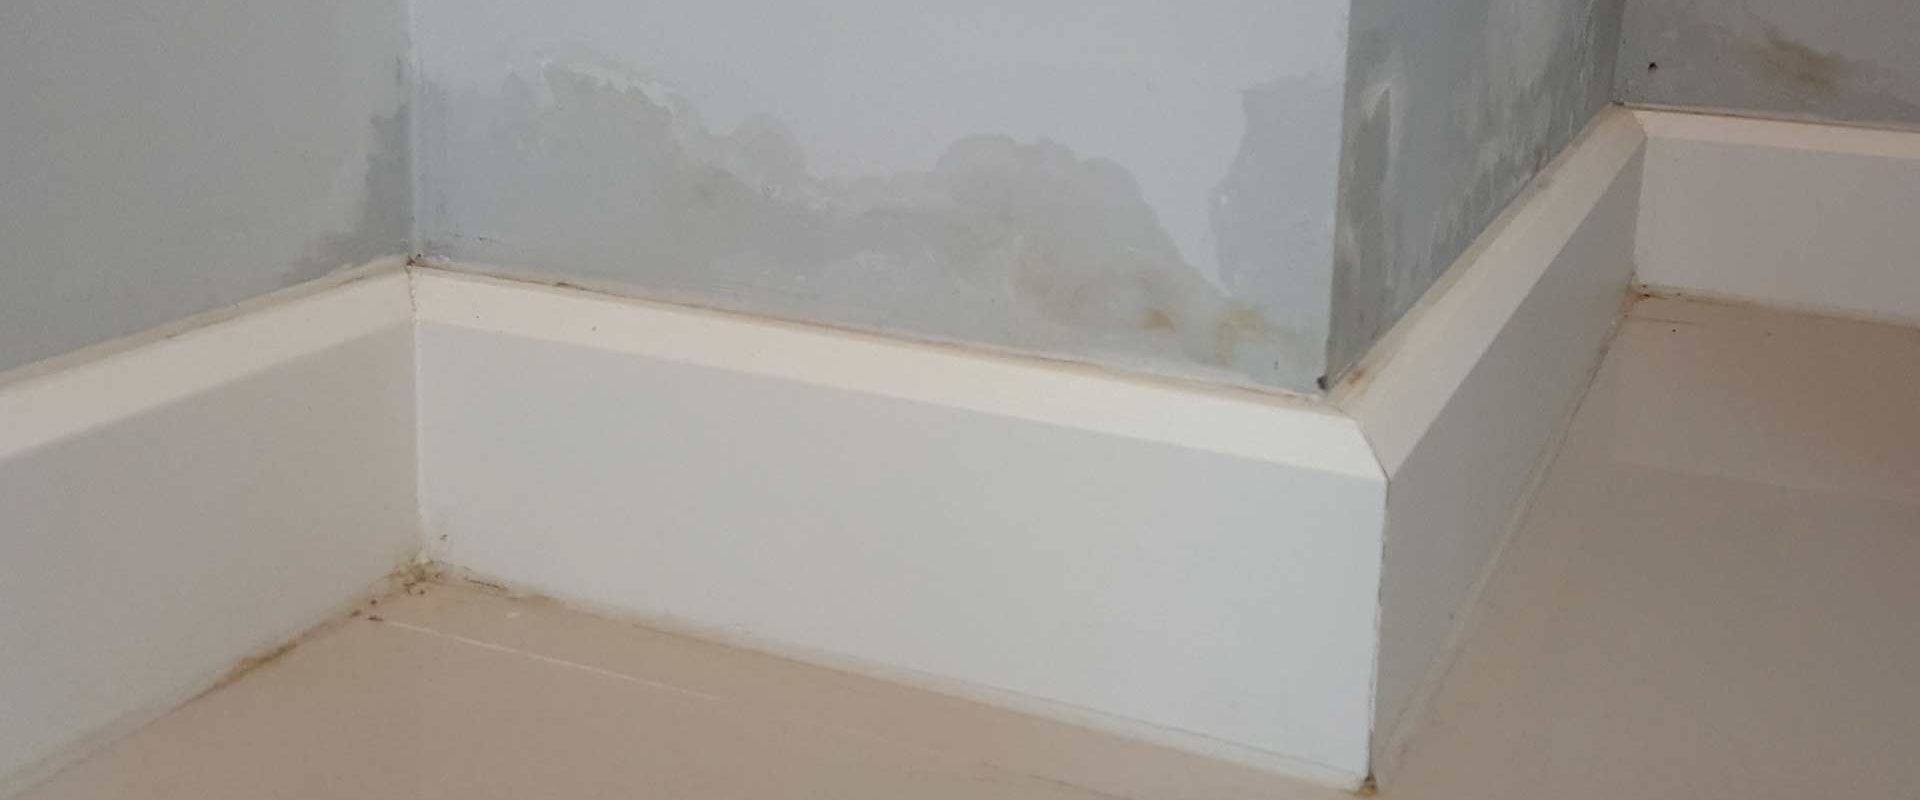 Will a damp wall dry out?